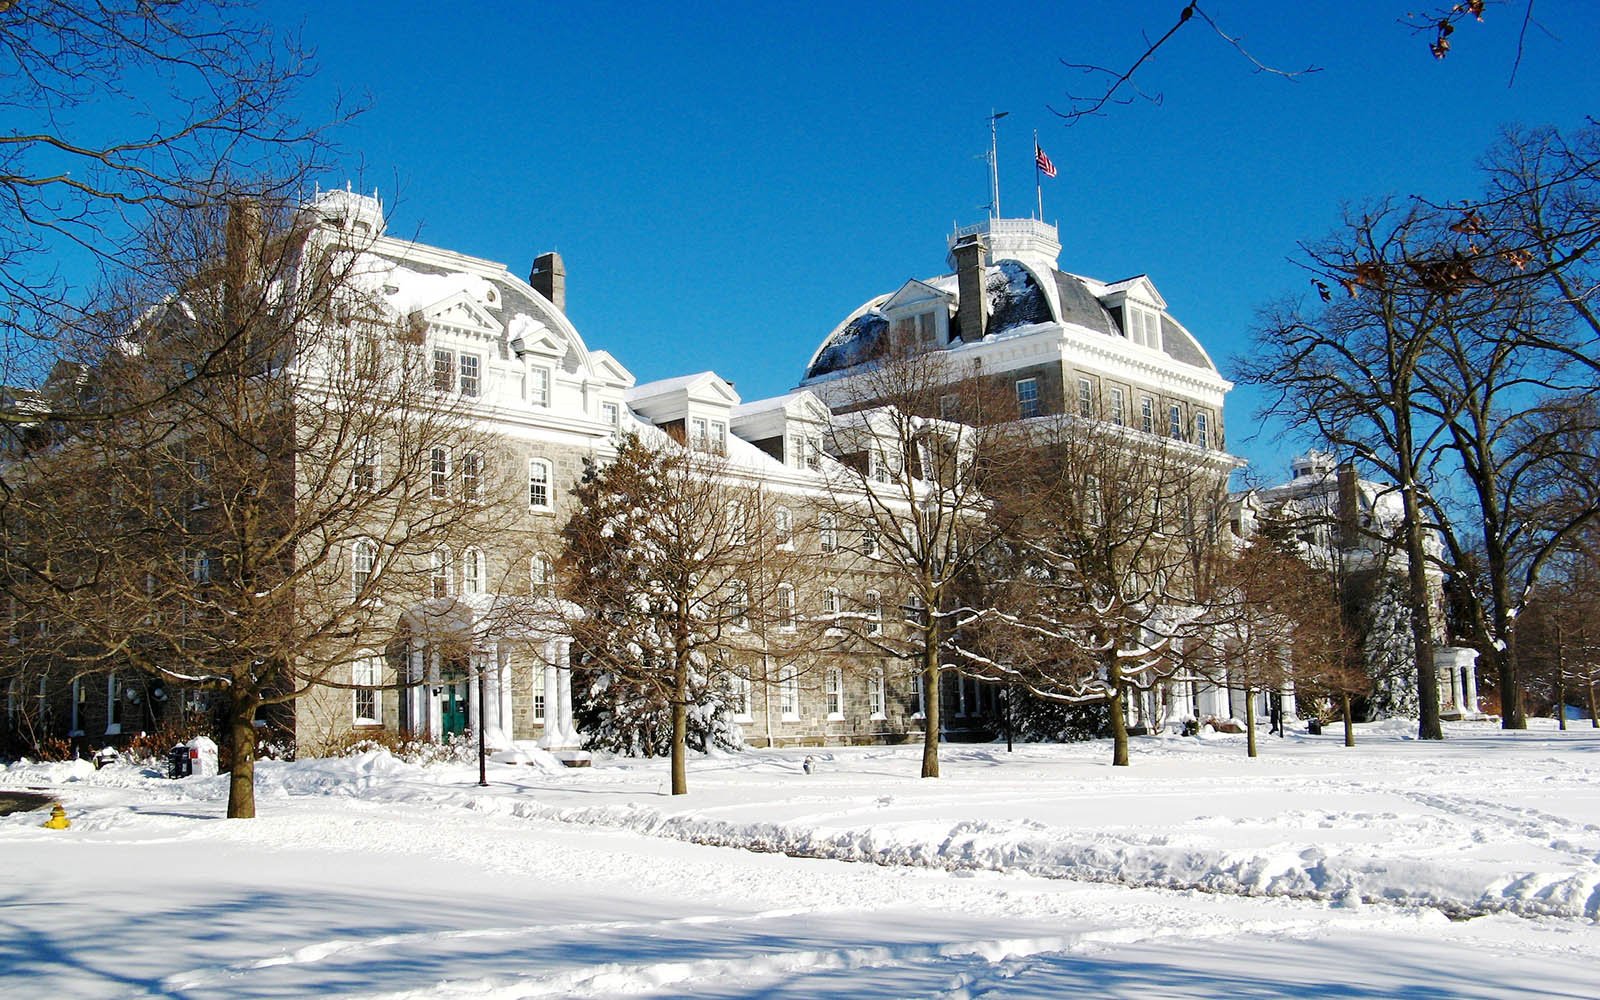 Parrish Hall covered in snow